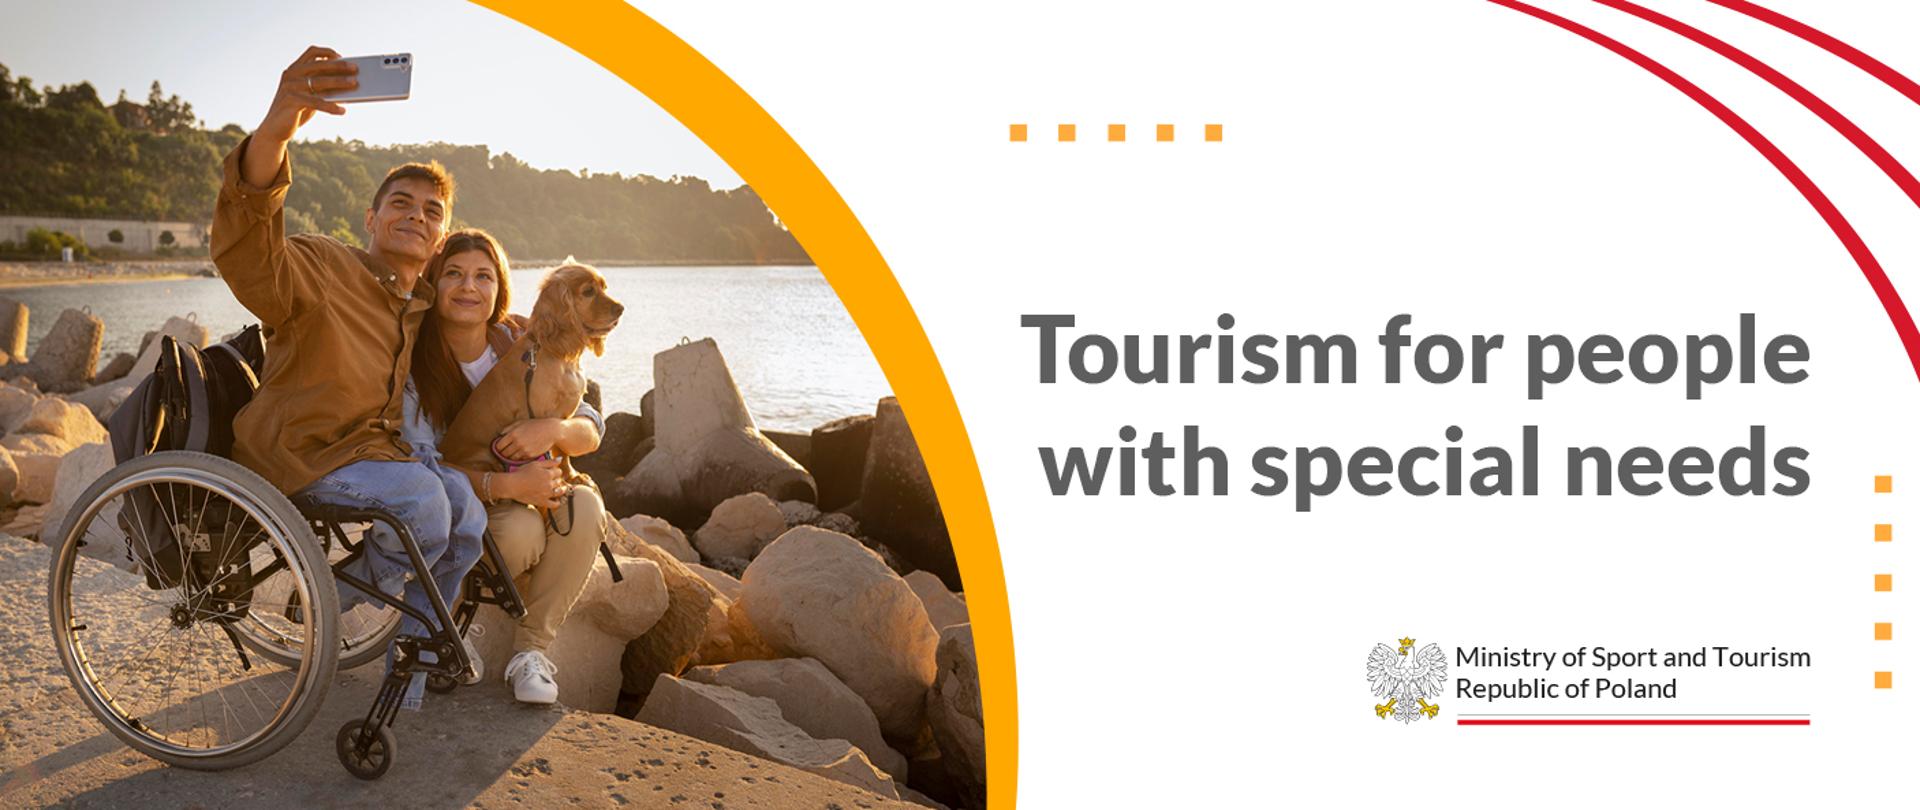 Tourism for people with special needs